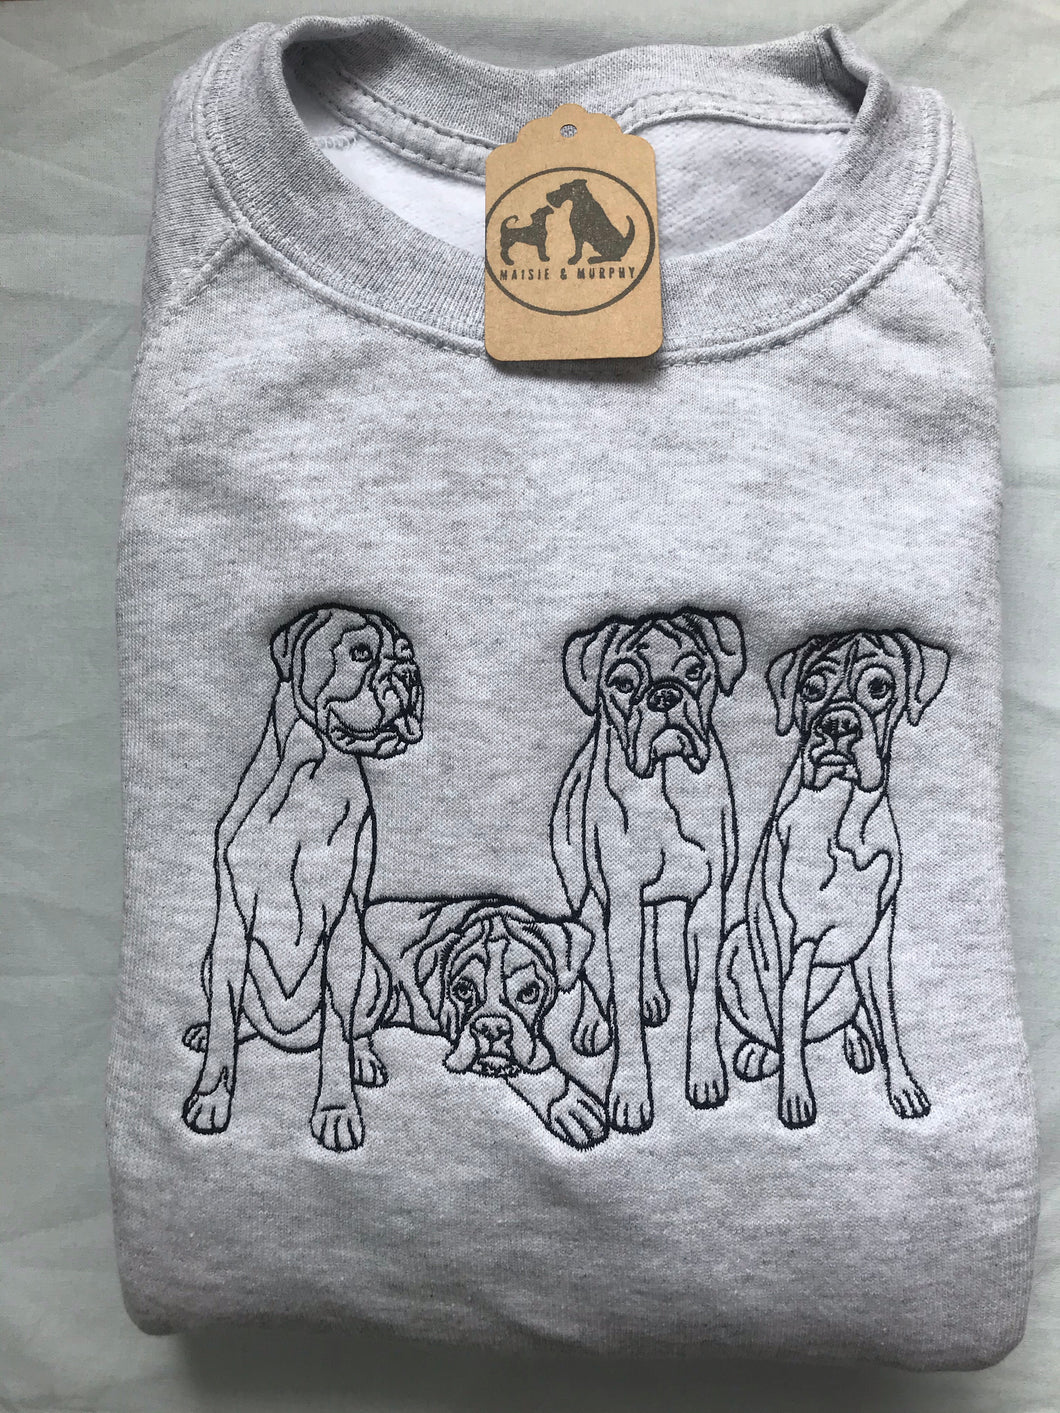 Embroidered Boxer Dog Sweatshirt - Gifts for boxer owners and lovers